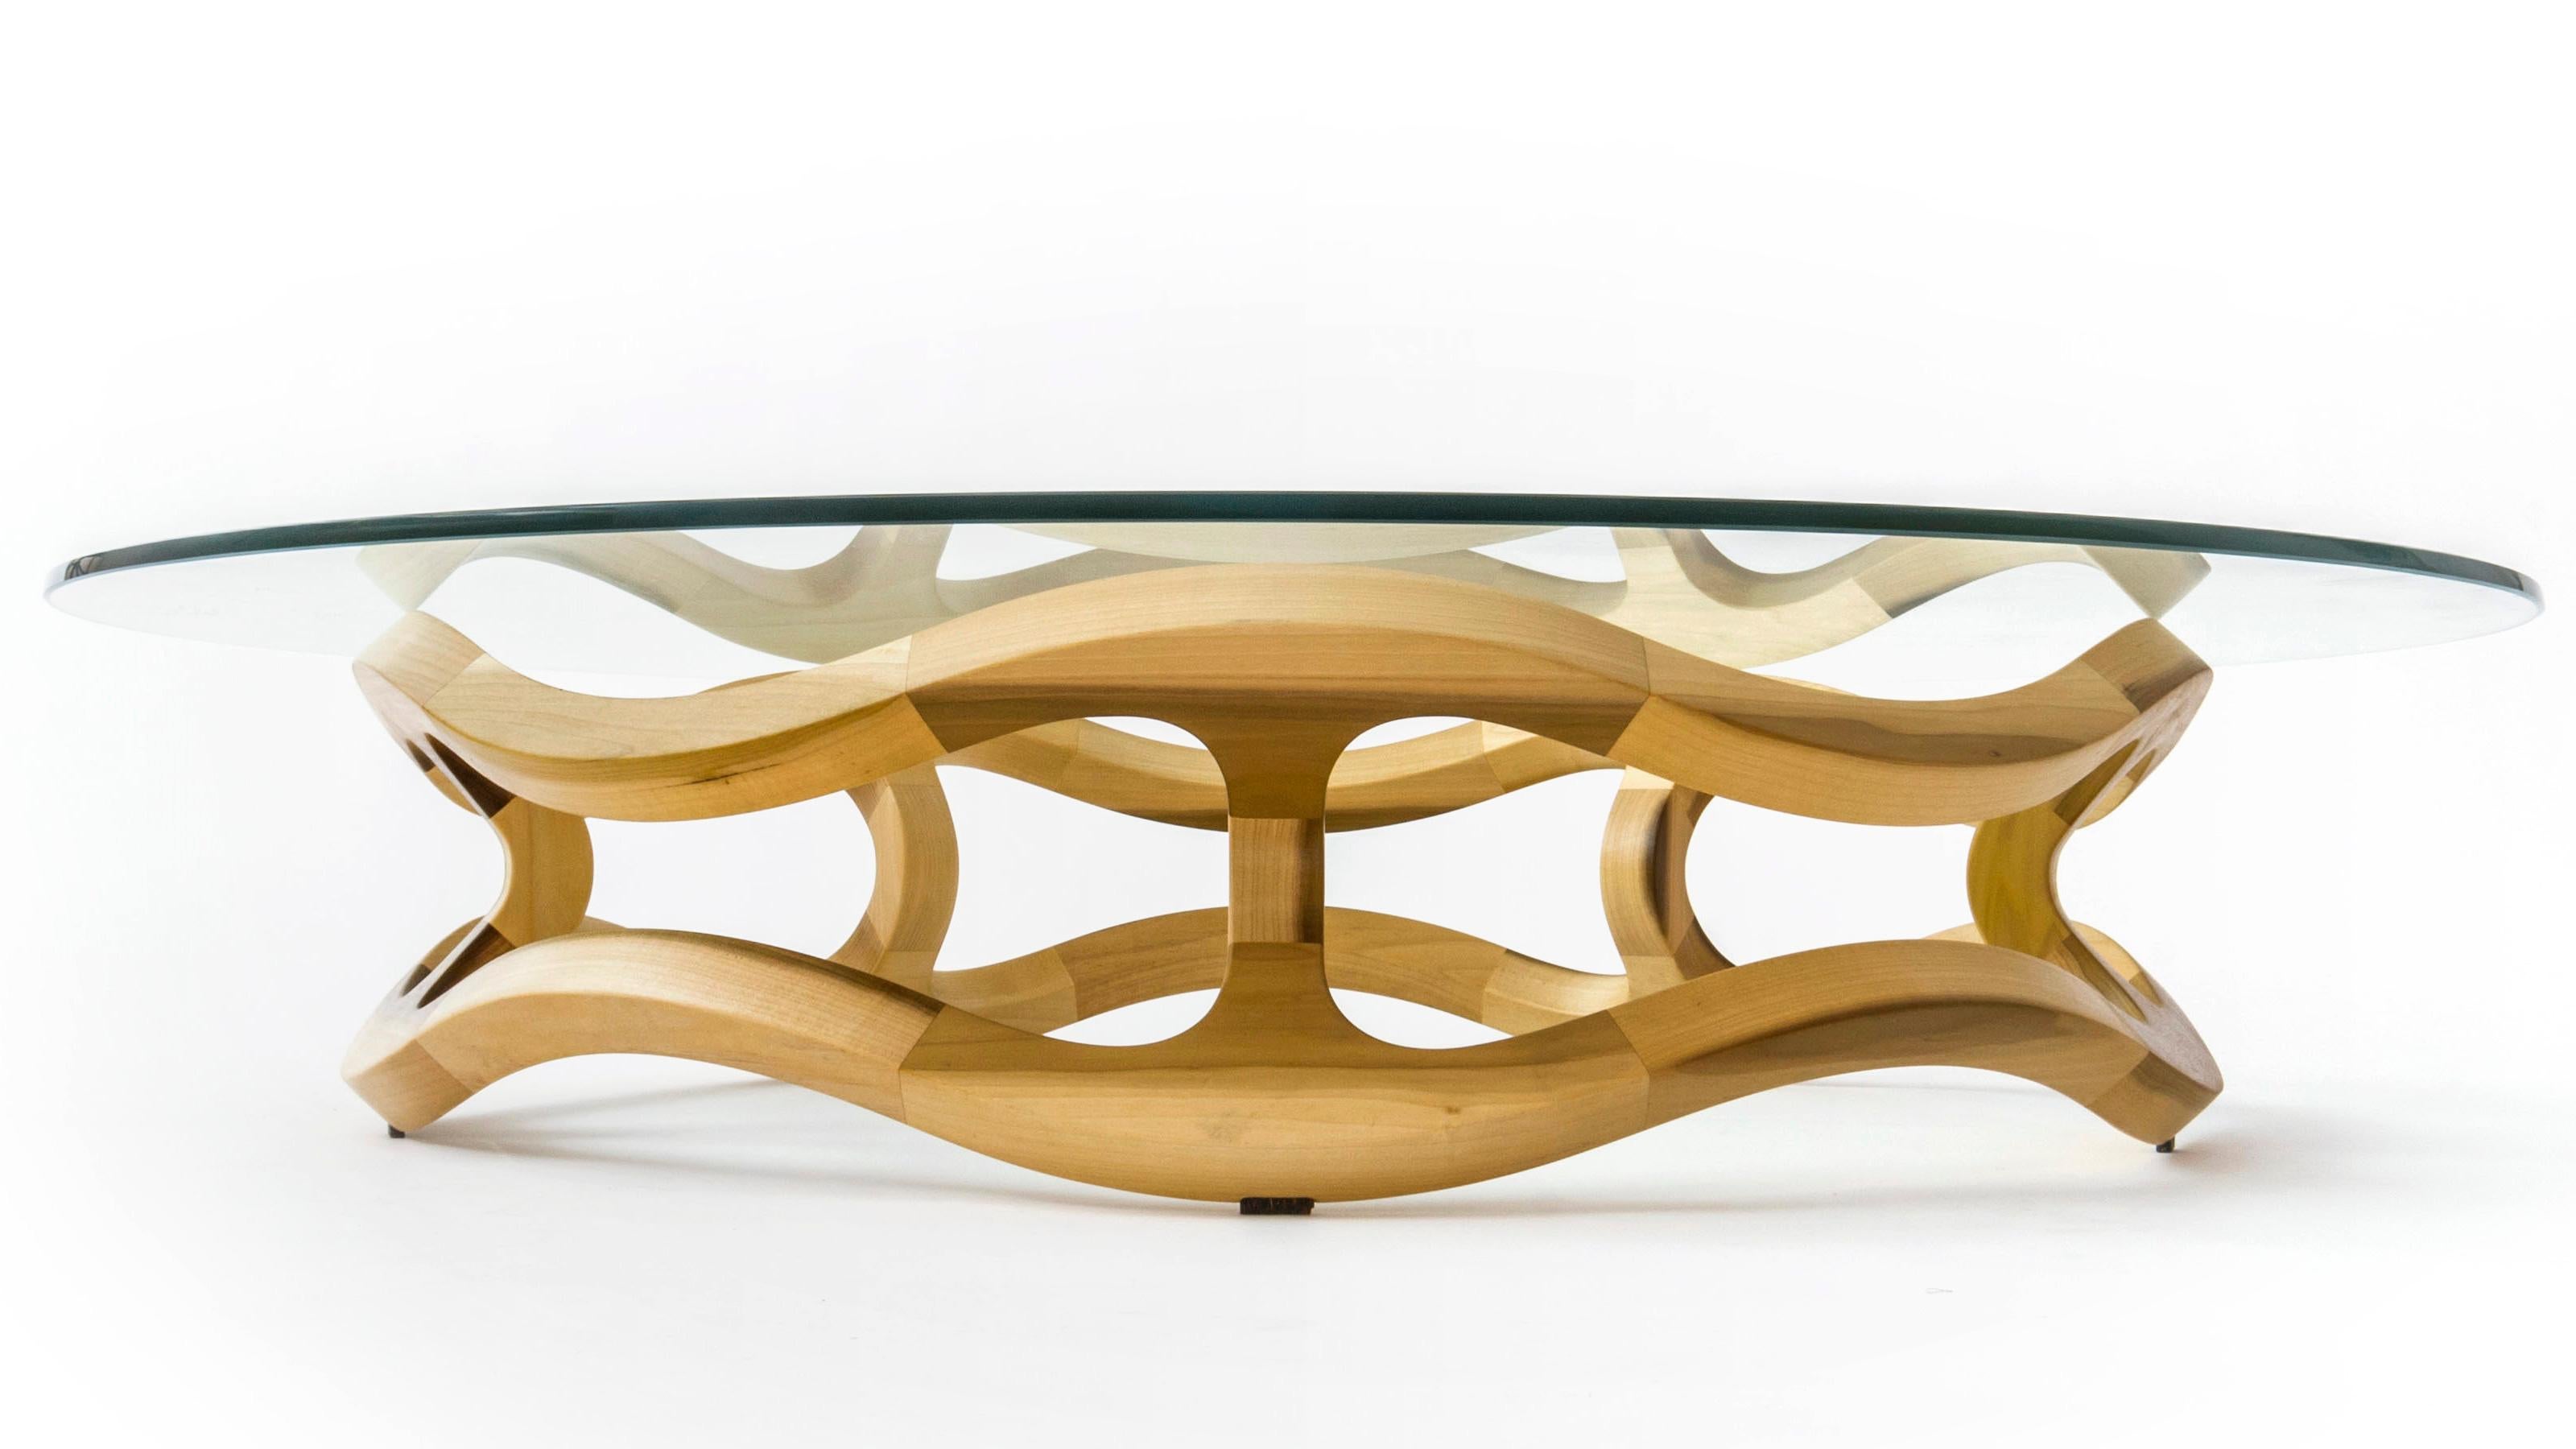 Flamenca, Geometric Sculptural Center Table Made of Solid Wood by Pedro Cerisola For Sale 7